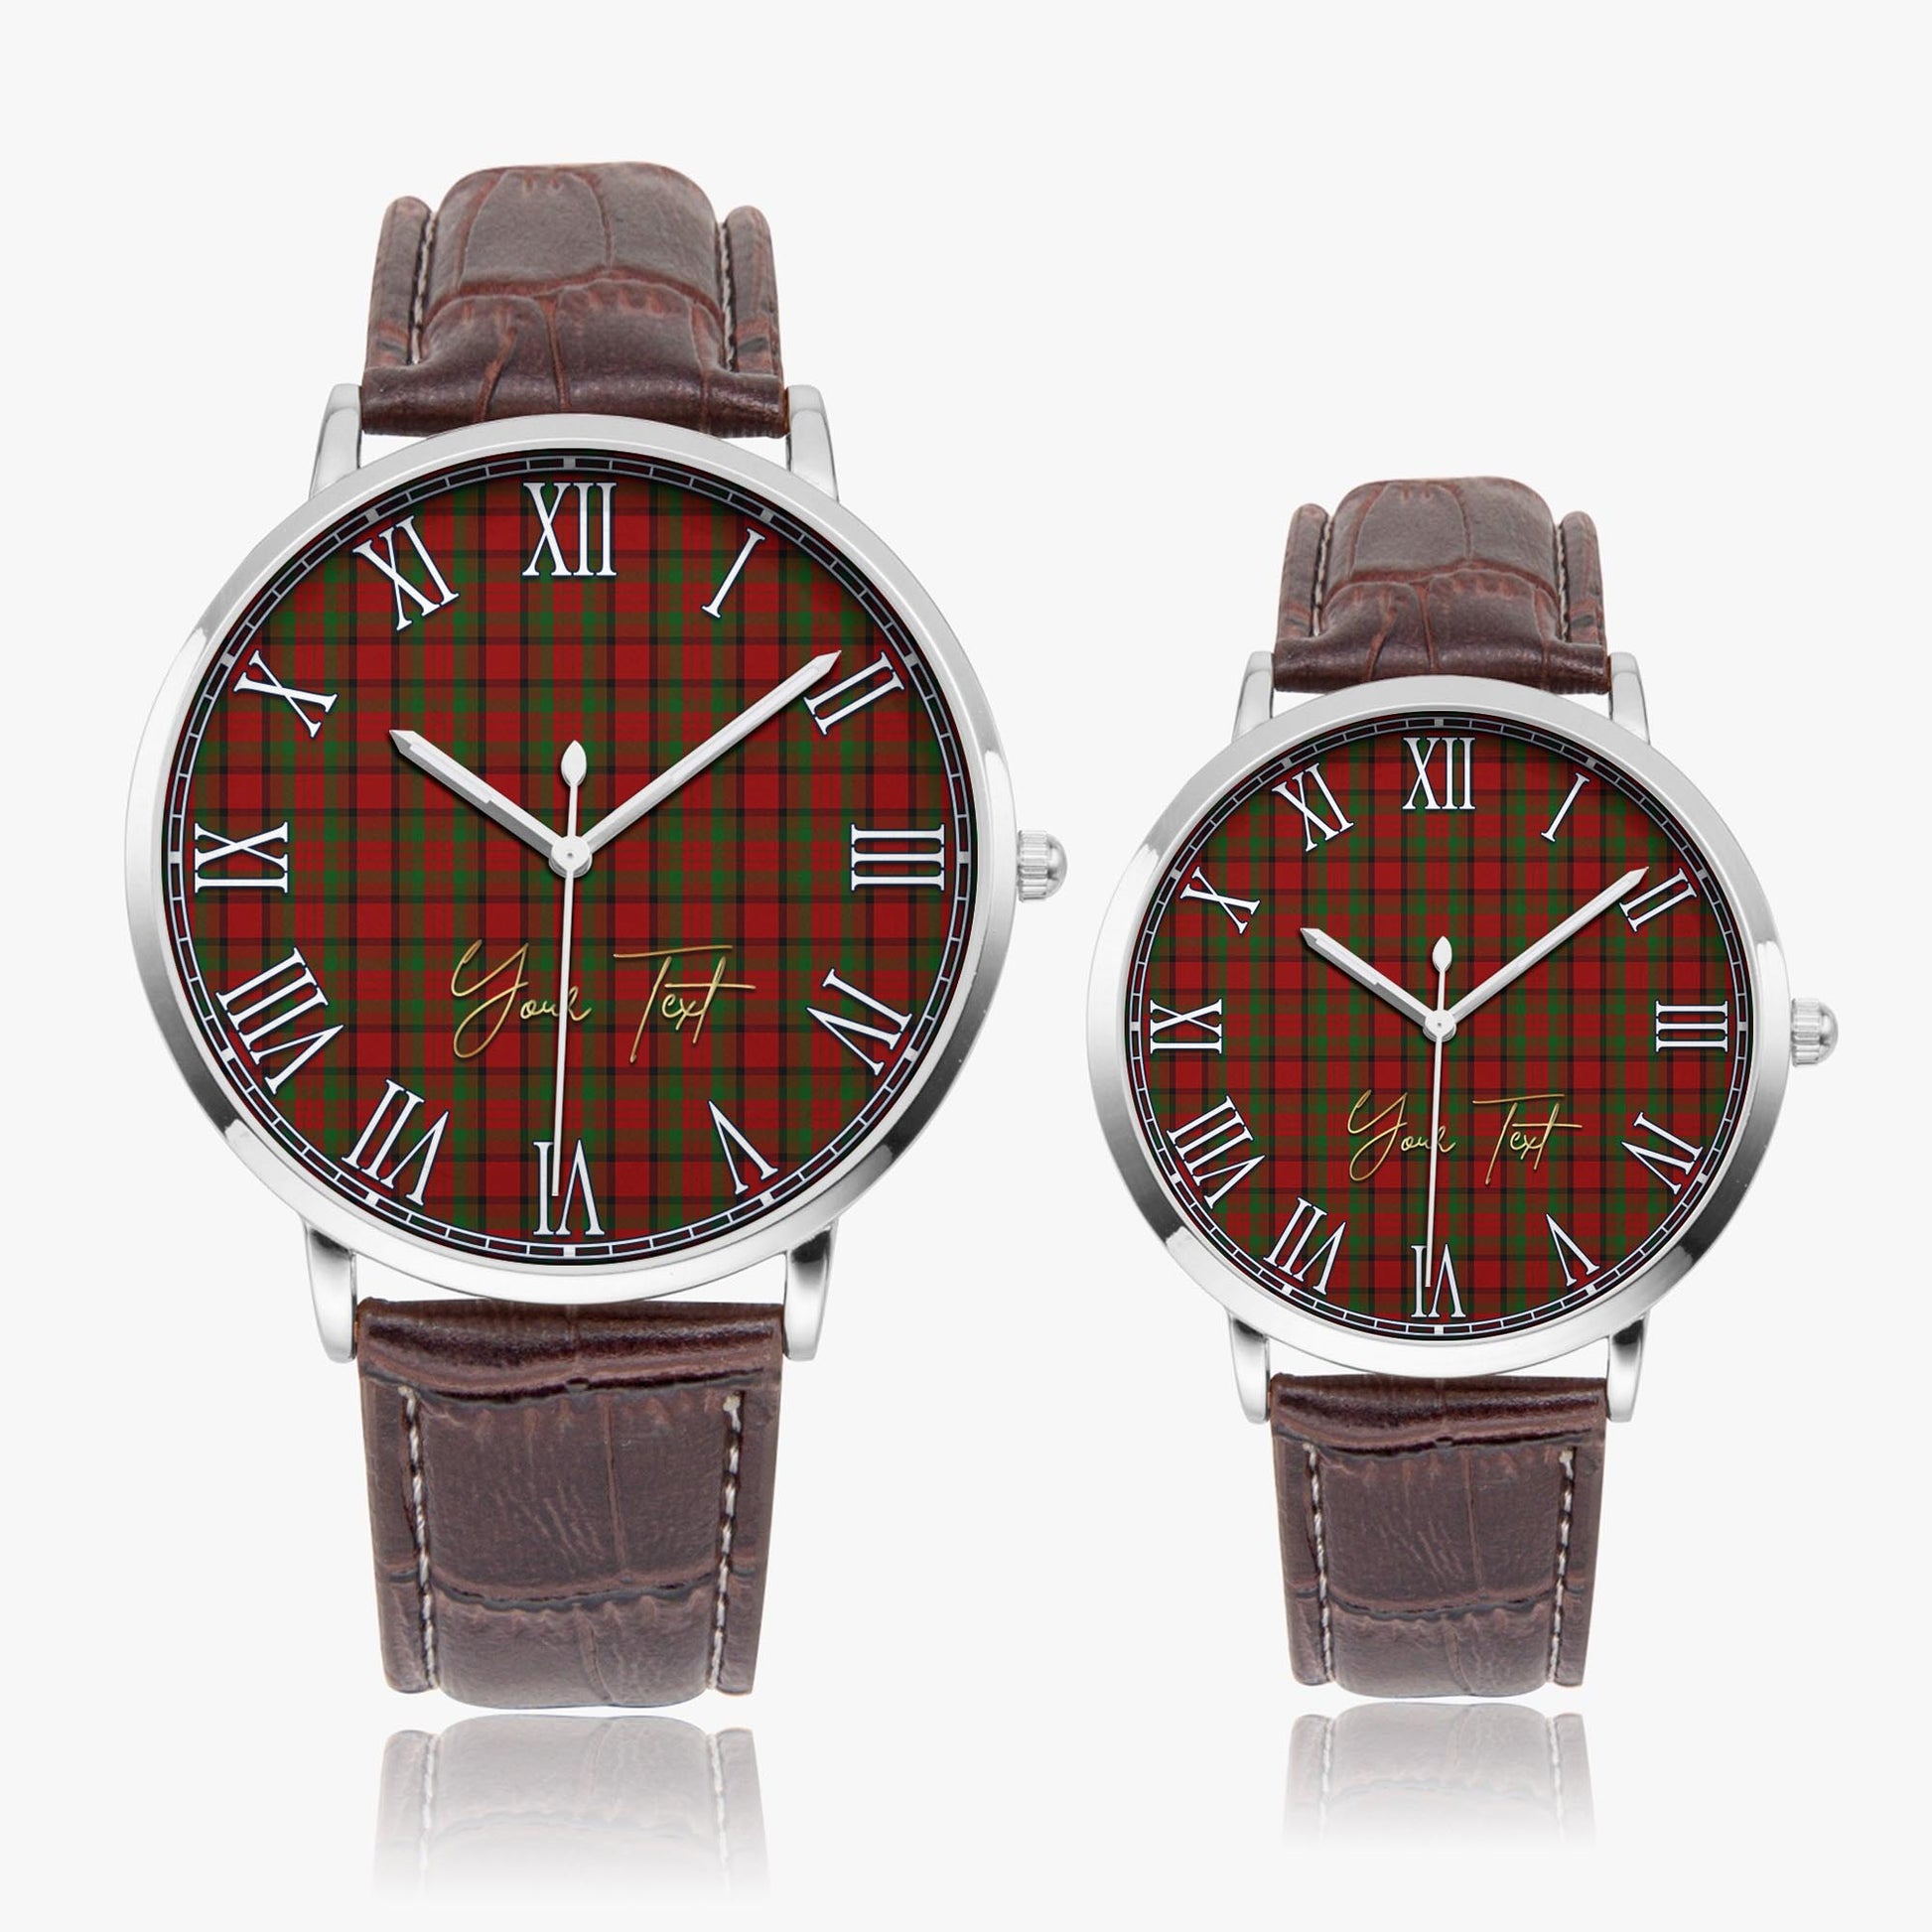 Tipperary County Ireland Tartan Personalized Your Text Leather Trap Quartz Watch Ultra Thin Silver Case With Brown Leather Strap - Tartanvibesclothing Shop